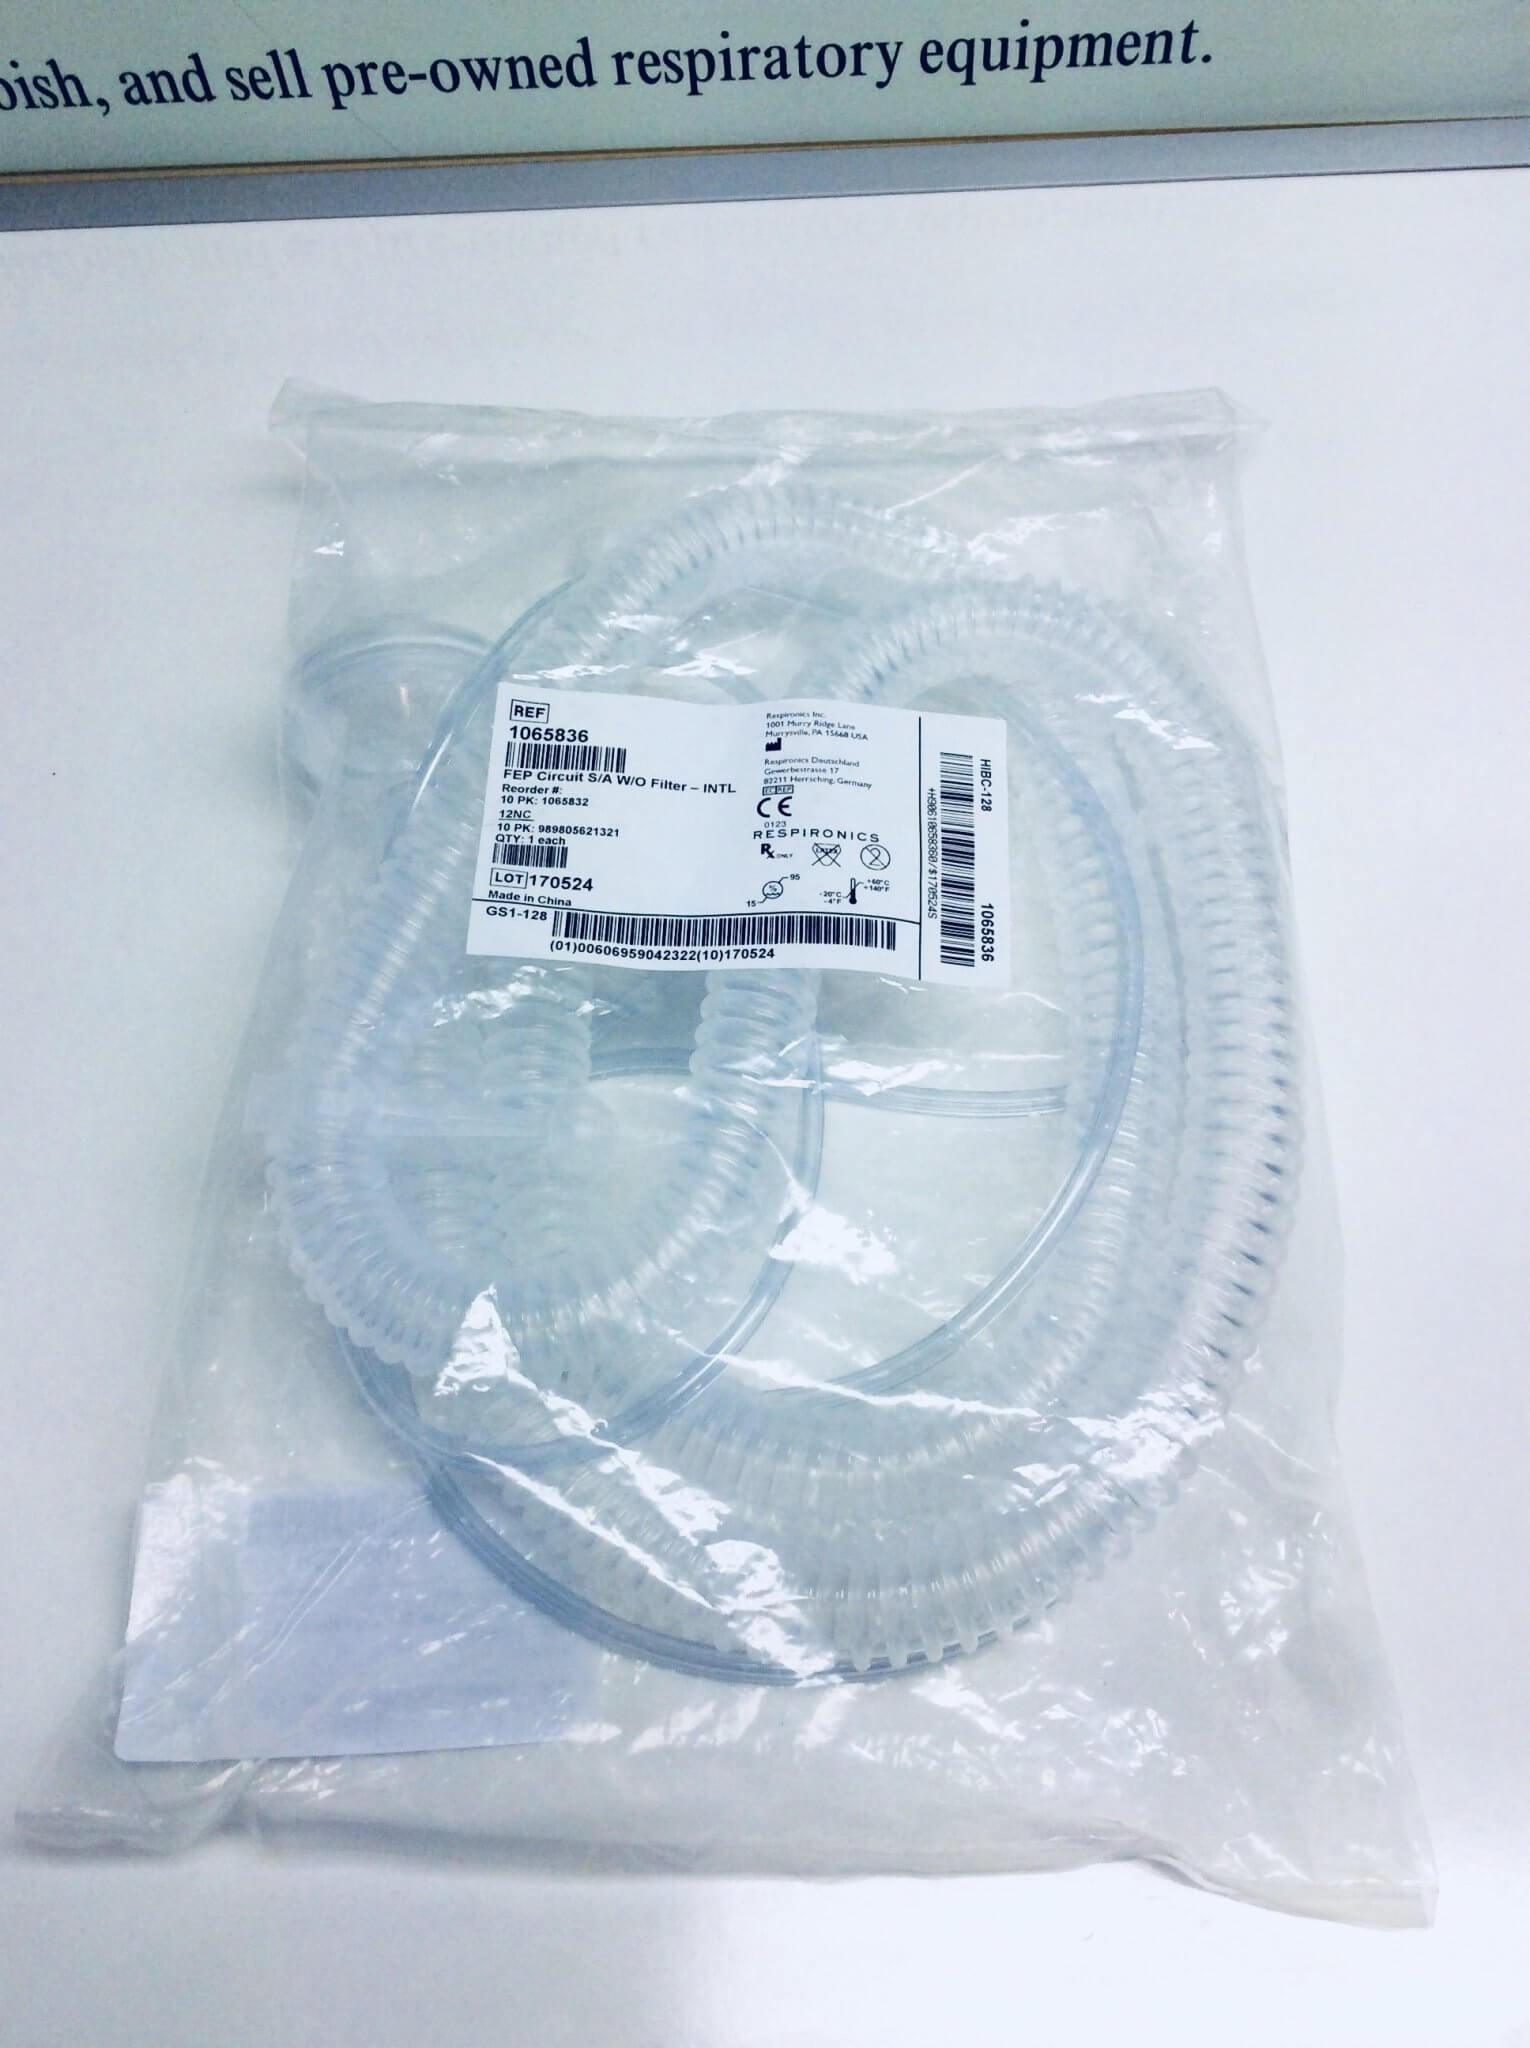 NEW Philips Respironics FEP Patient Circuit S/A without Filter INTL 1065836 FREE Shipping - MBR Medicals